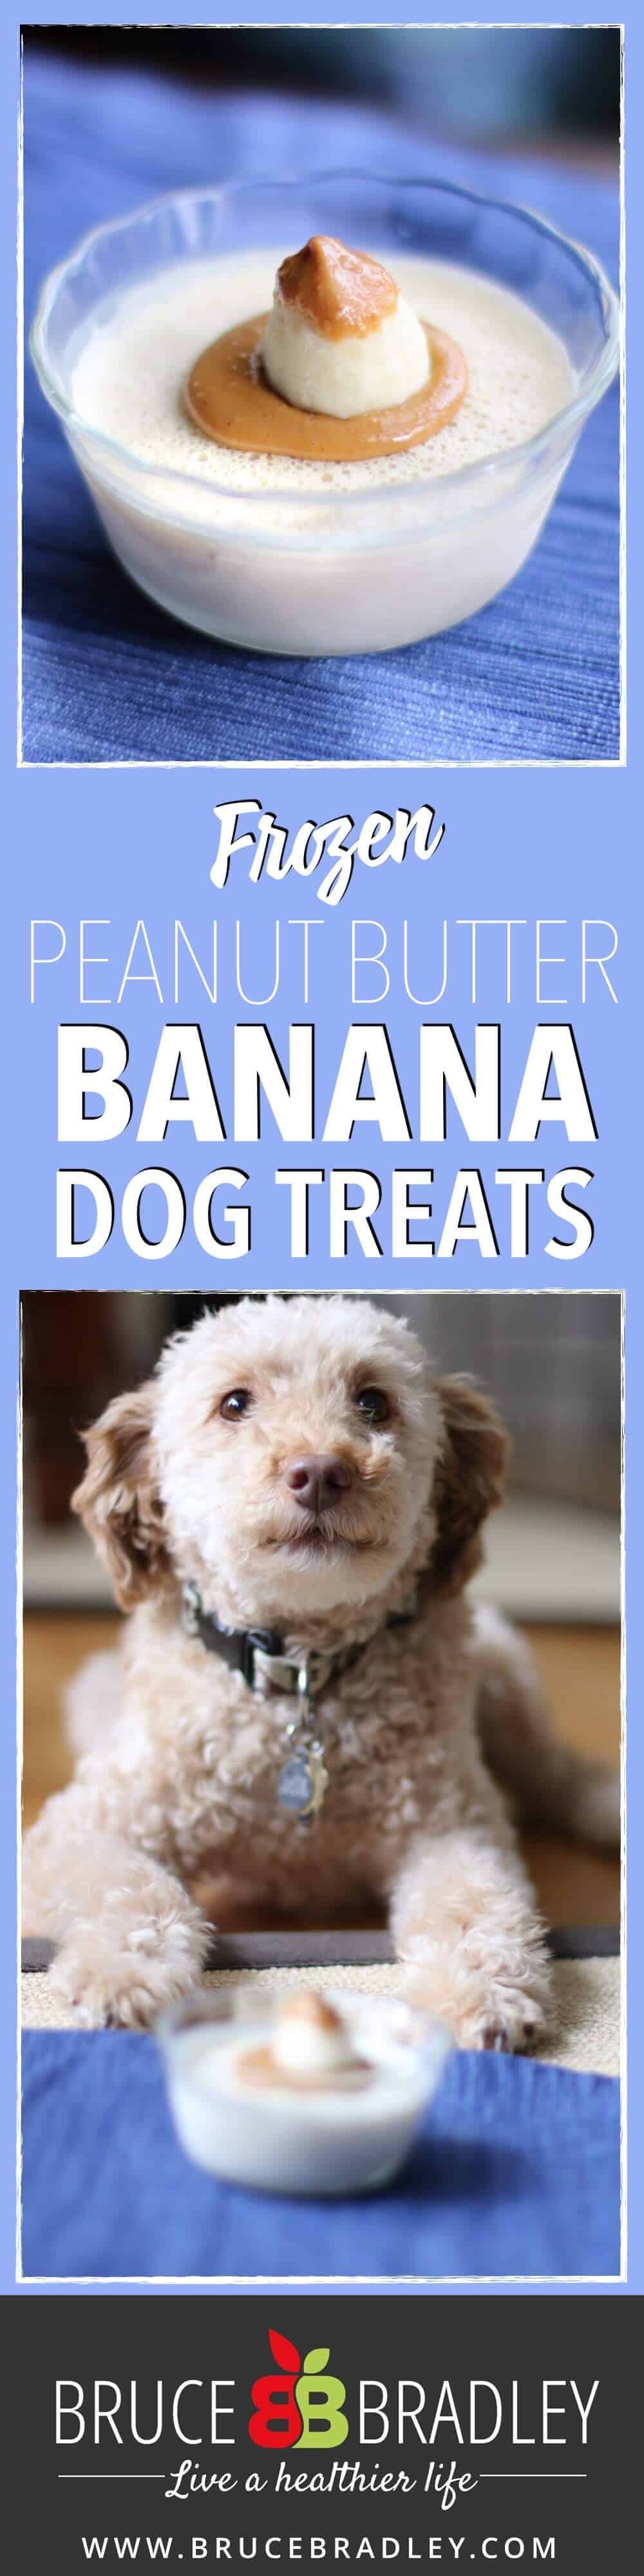 Our Special Three Ingredient, Real Food Frozen Dog Treats Are Super Easy To Make, And Oh Boy Does Our Dog Love Them!